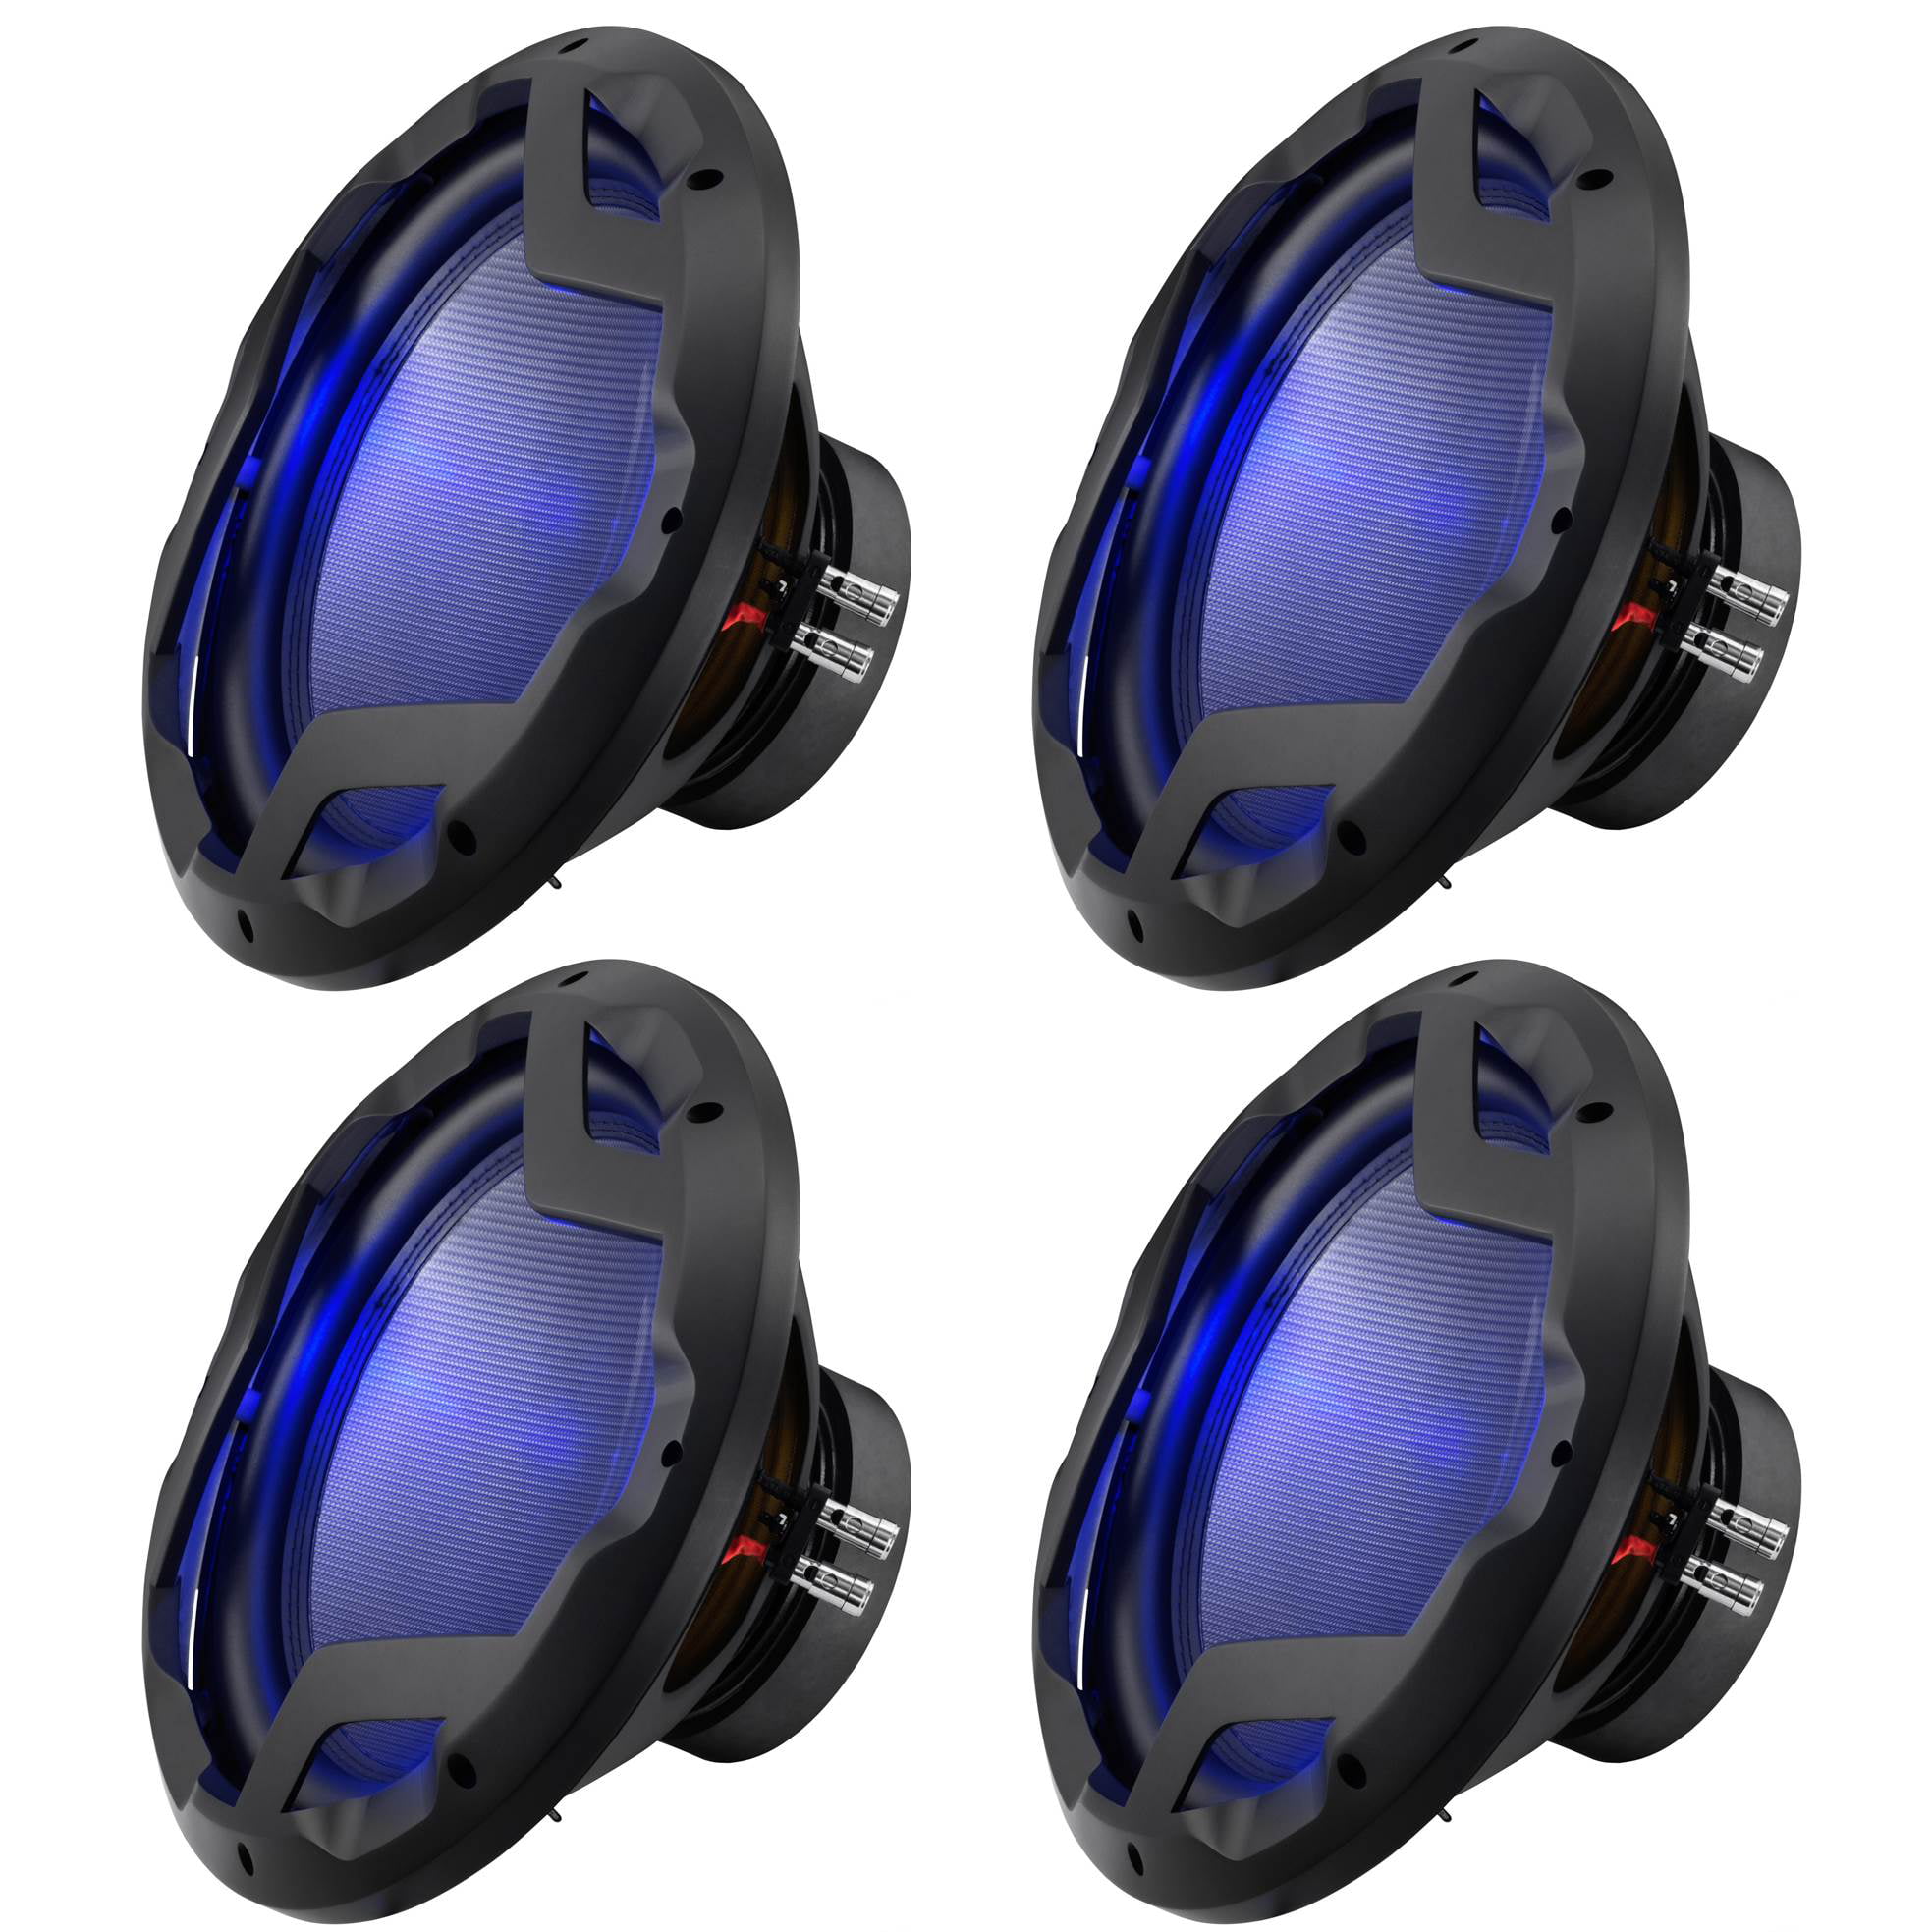 NEW 12/" DVC 1600w Subwoofer Bass.Replacement.Speaker.Blue Led lights.Car Audio.